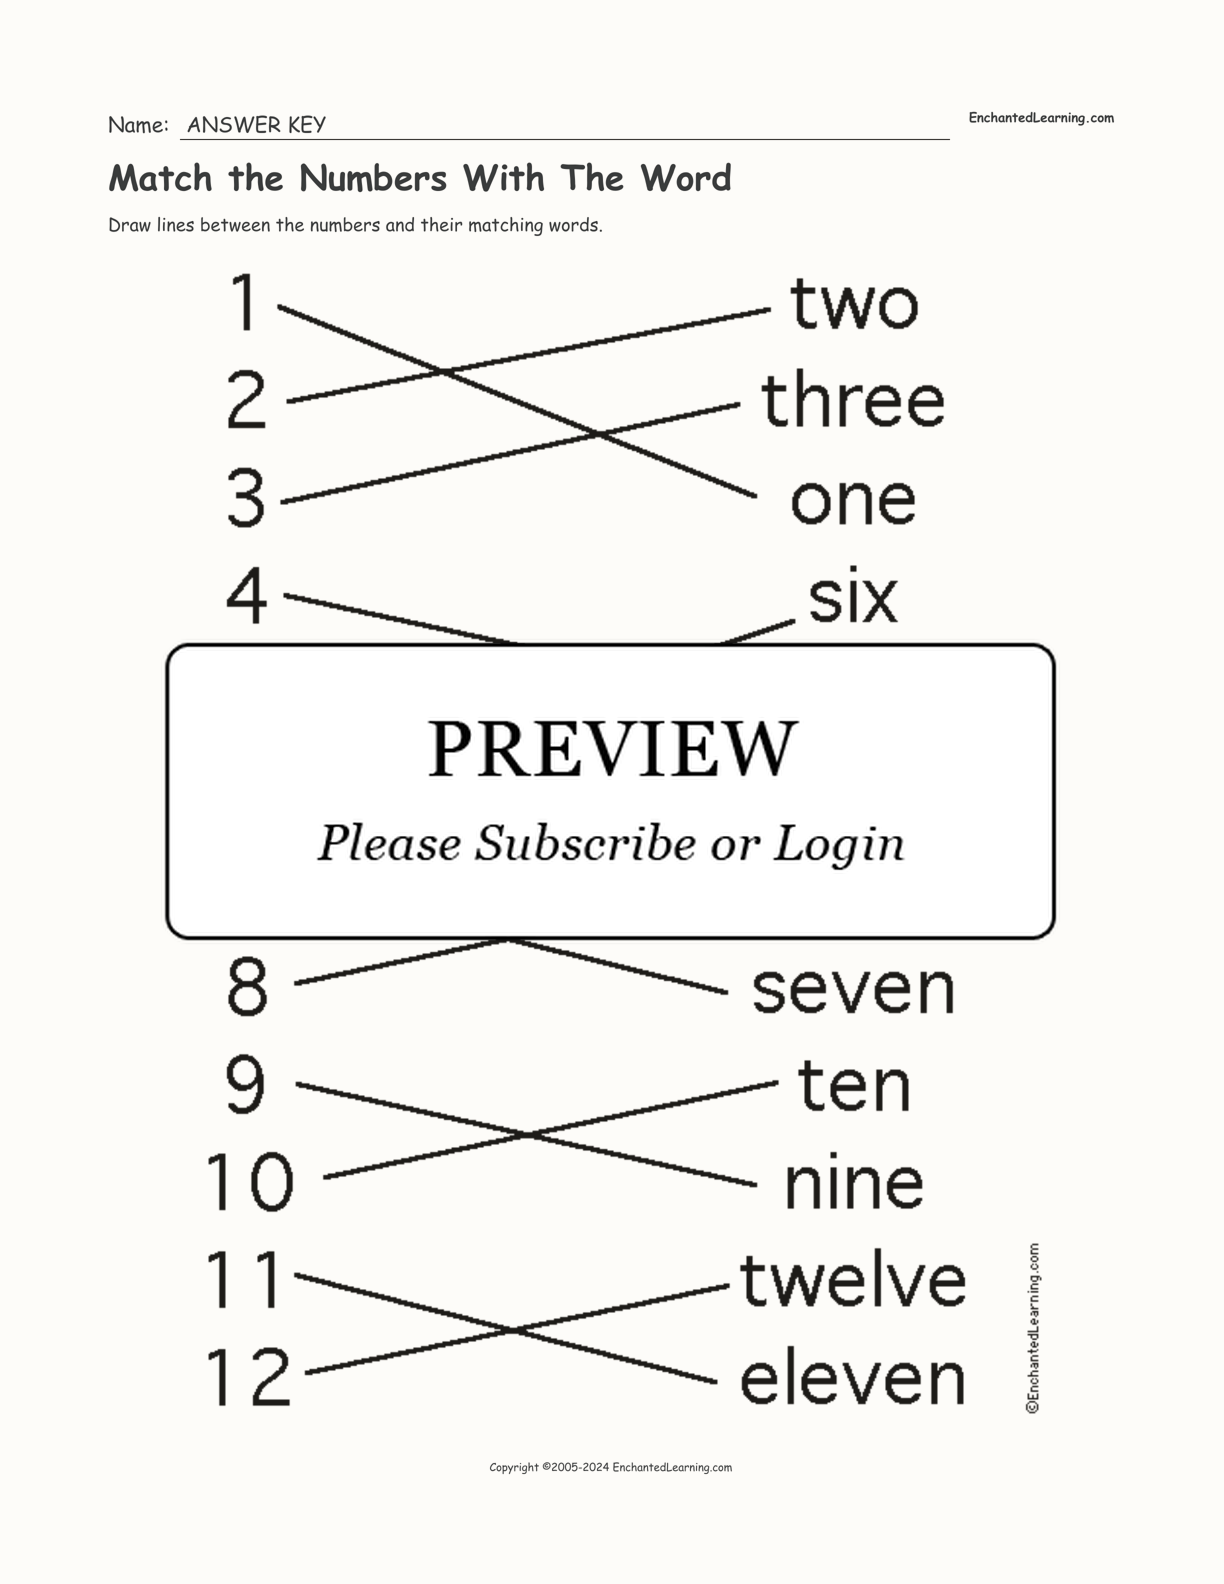 Match the Numbers With The Word interactive worksheet page 2